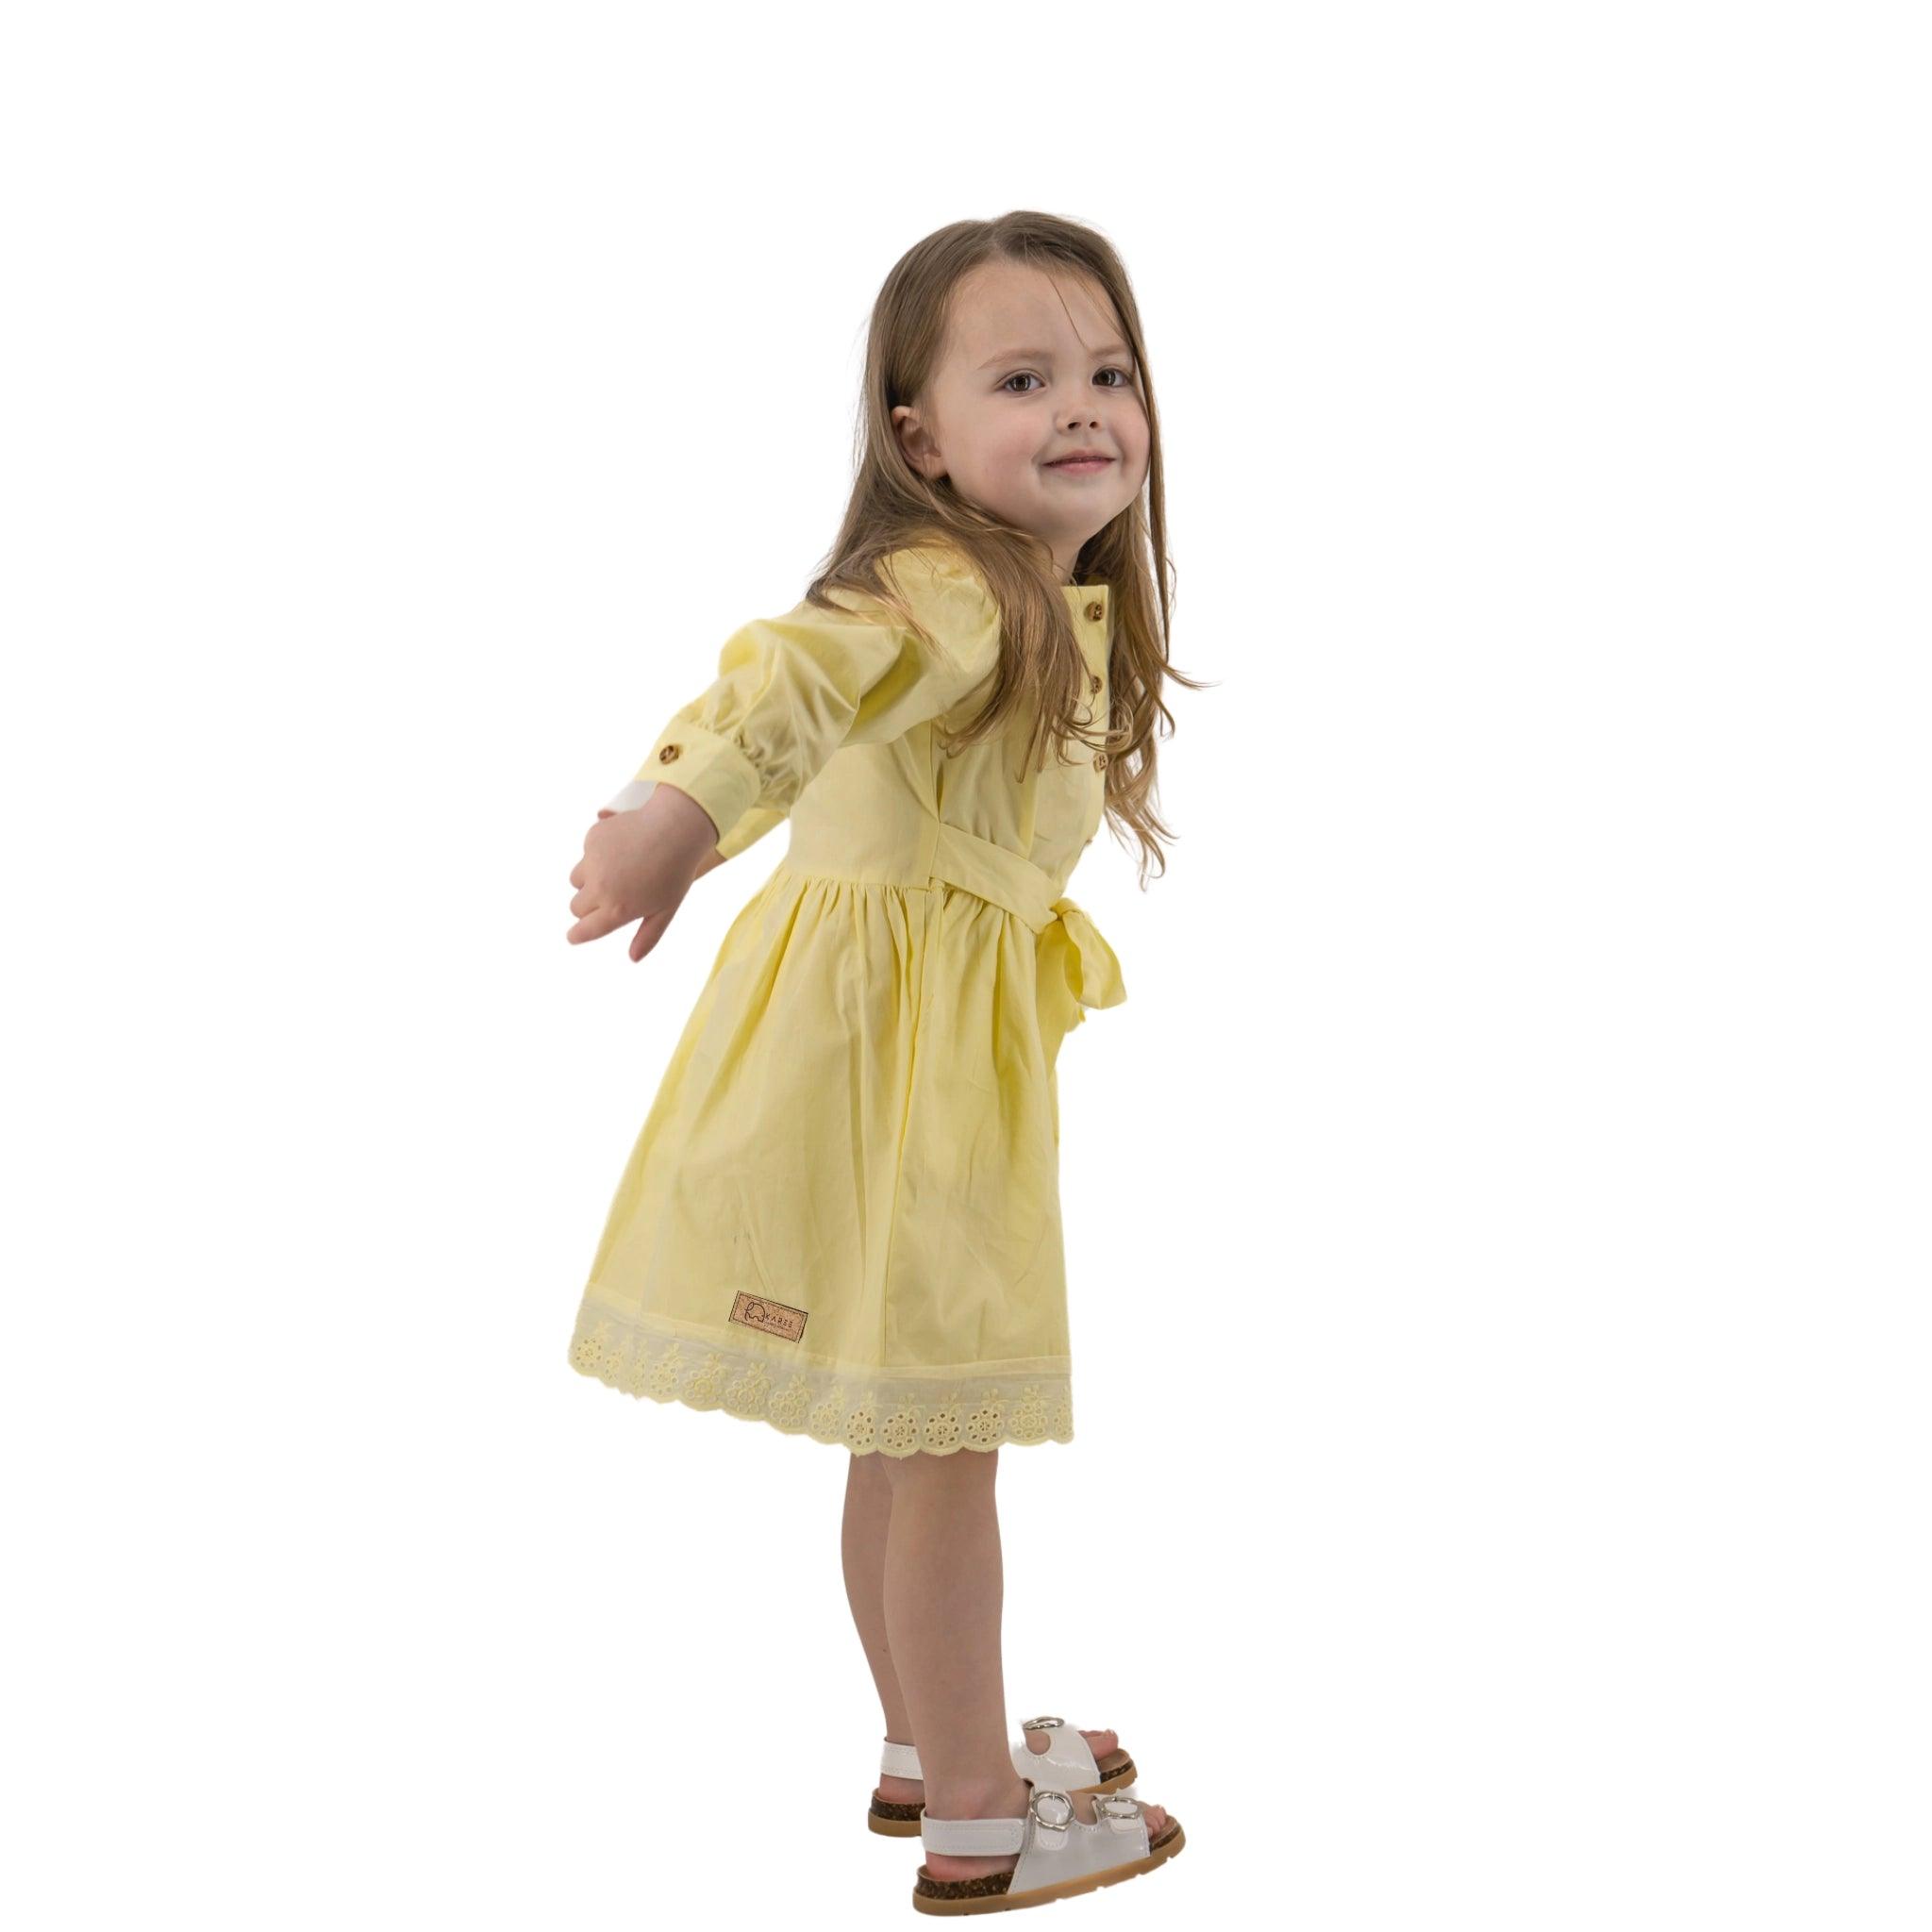 A young girl in a Karee yellow long puff sleeve cotton dress and white sandals, standing with arms outstretched, smiling at the camera. White background.